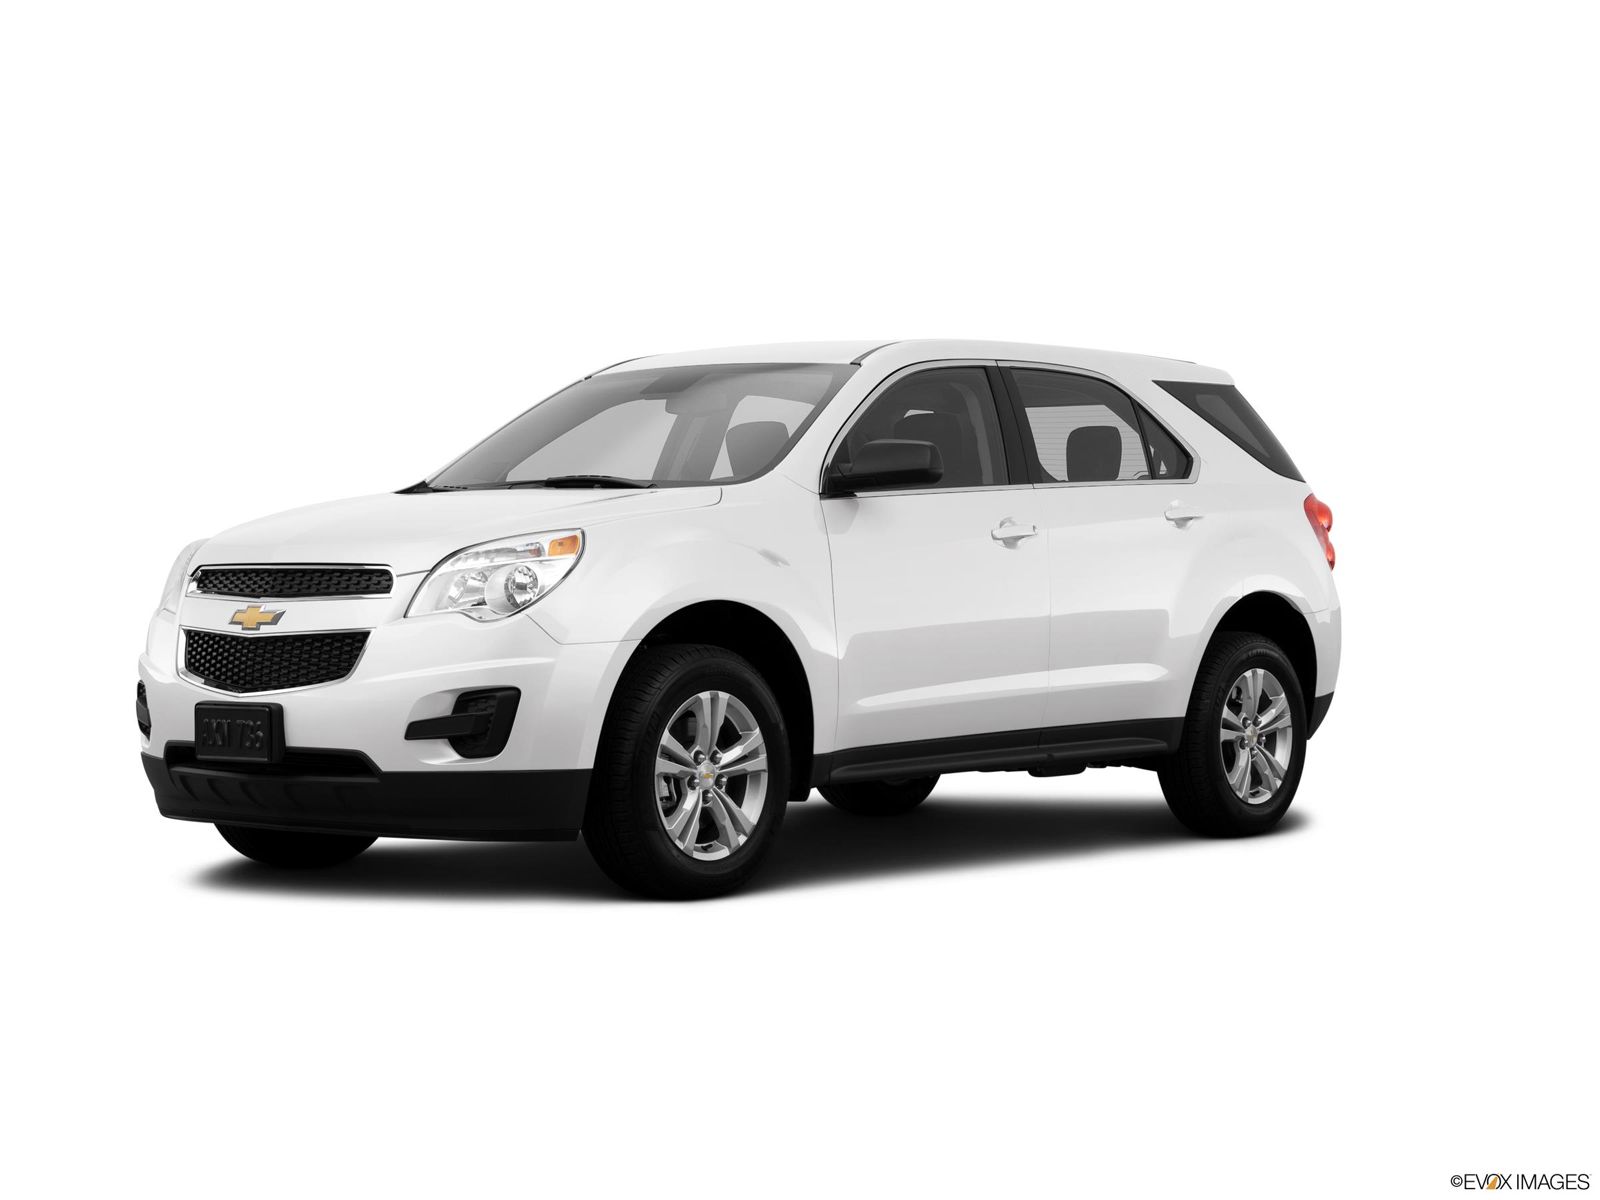 2014 Chevrolet Equinox Research, photos, specs, and expertise | CarMax